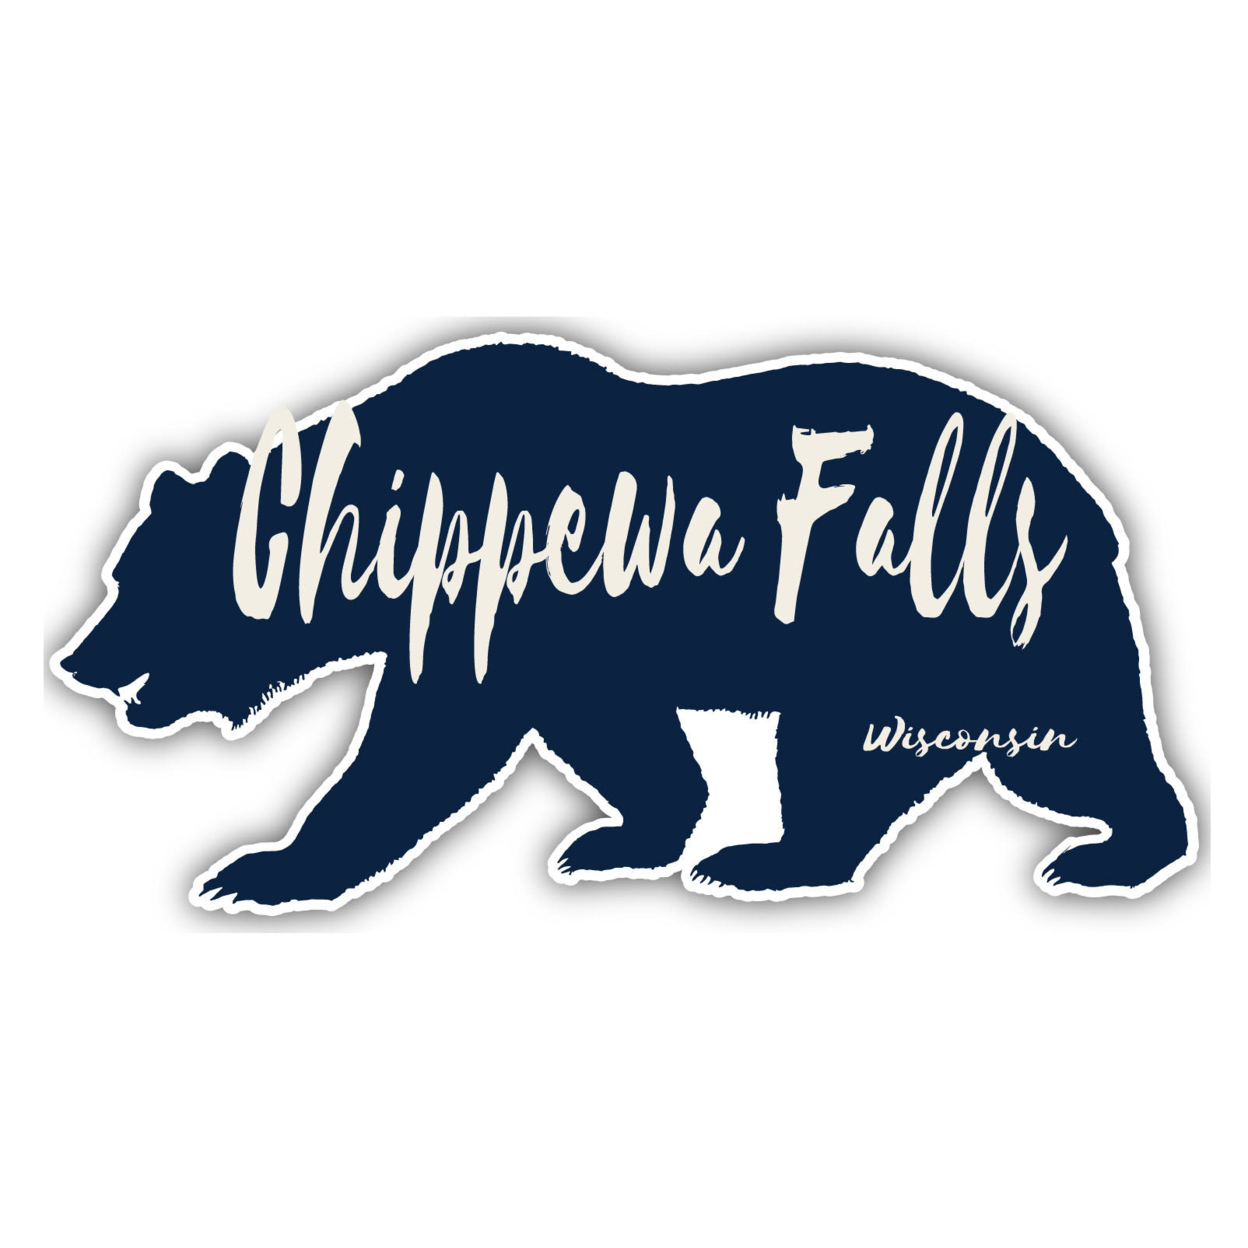 Chippewa Falls Wisconsin Souvenir Decorative Stickers (Choose Theme And Size) - 4-Pack, 6-Inch, Bear